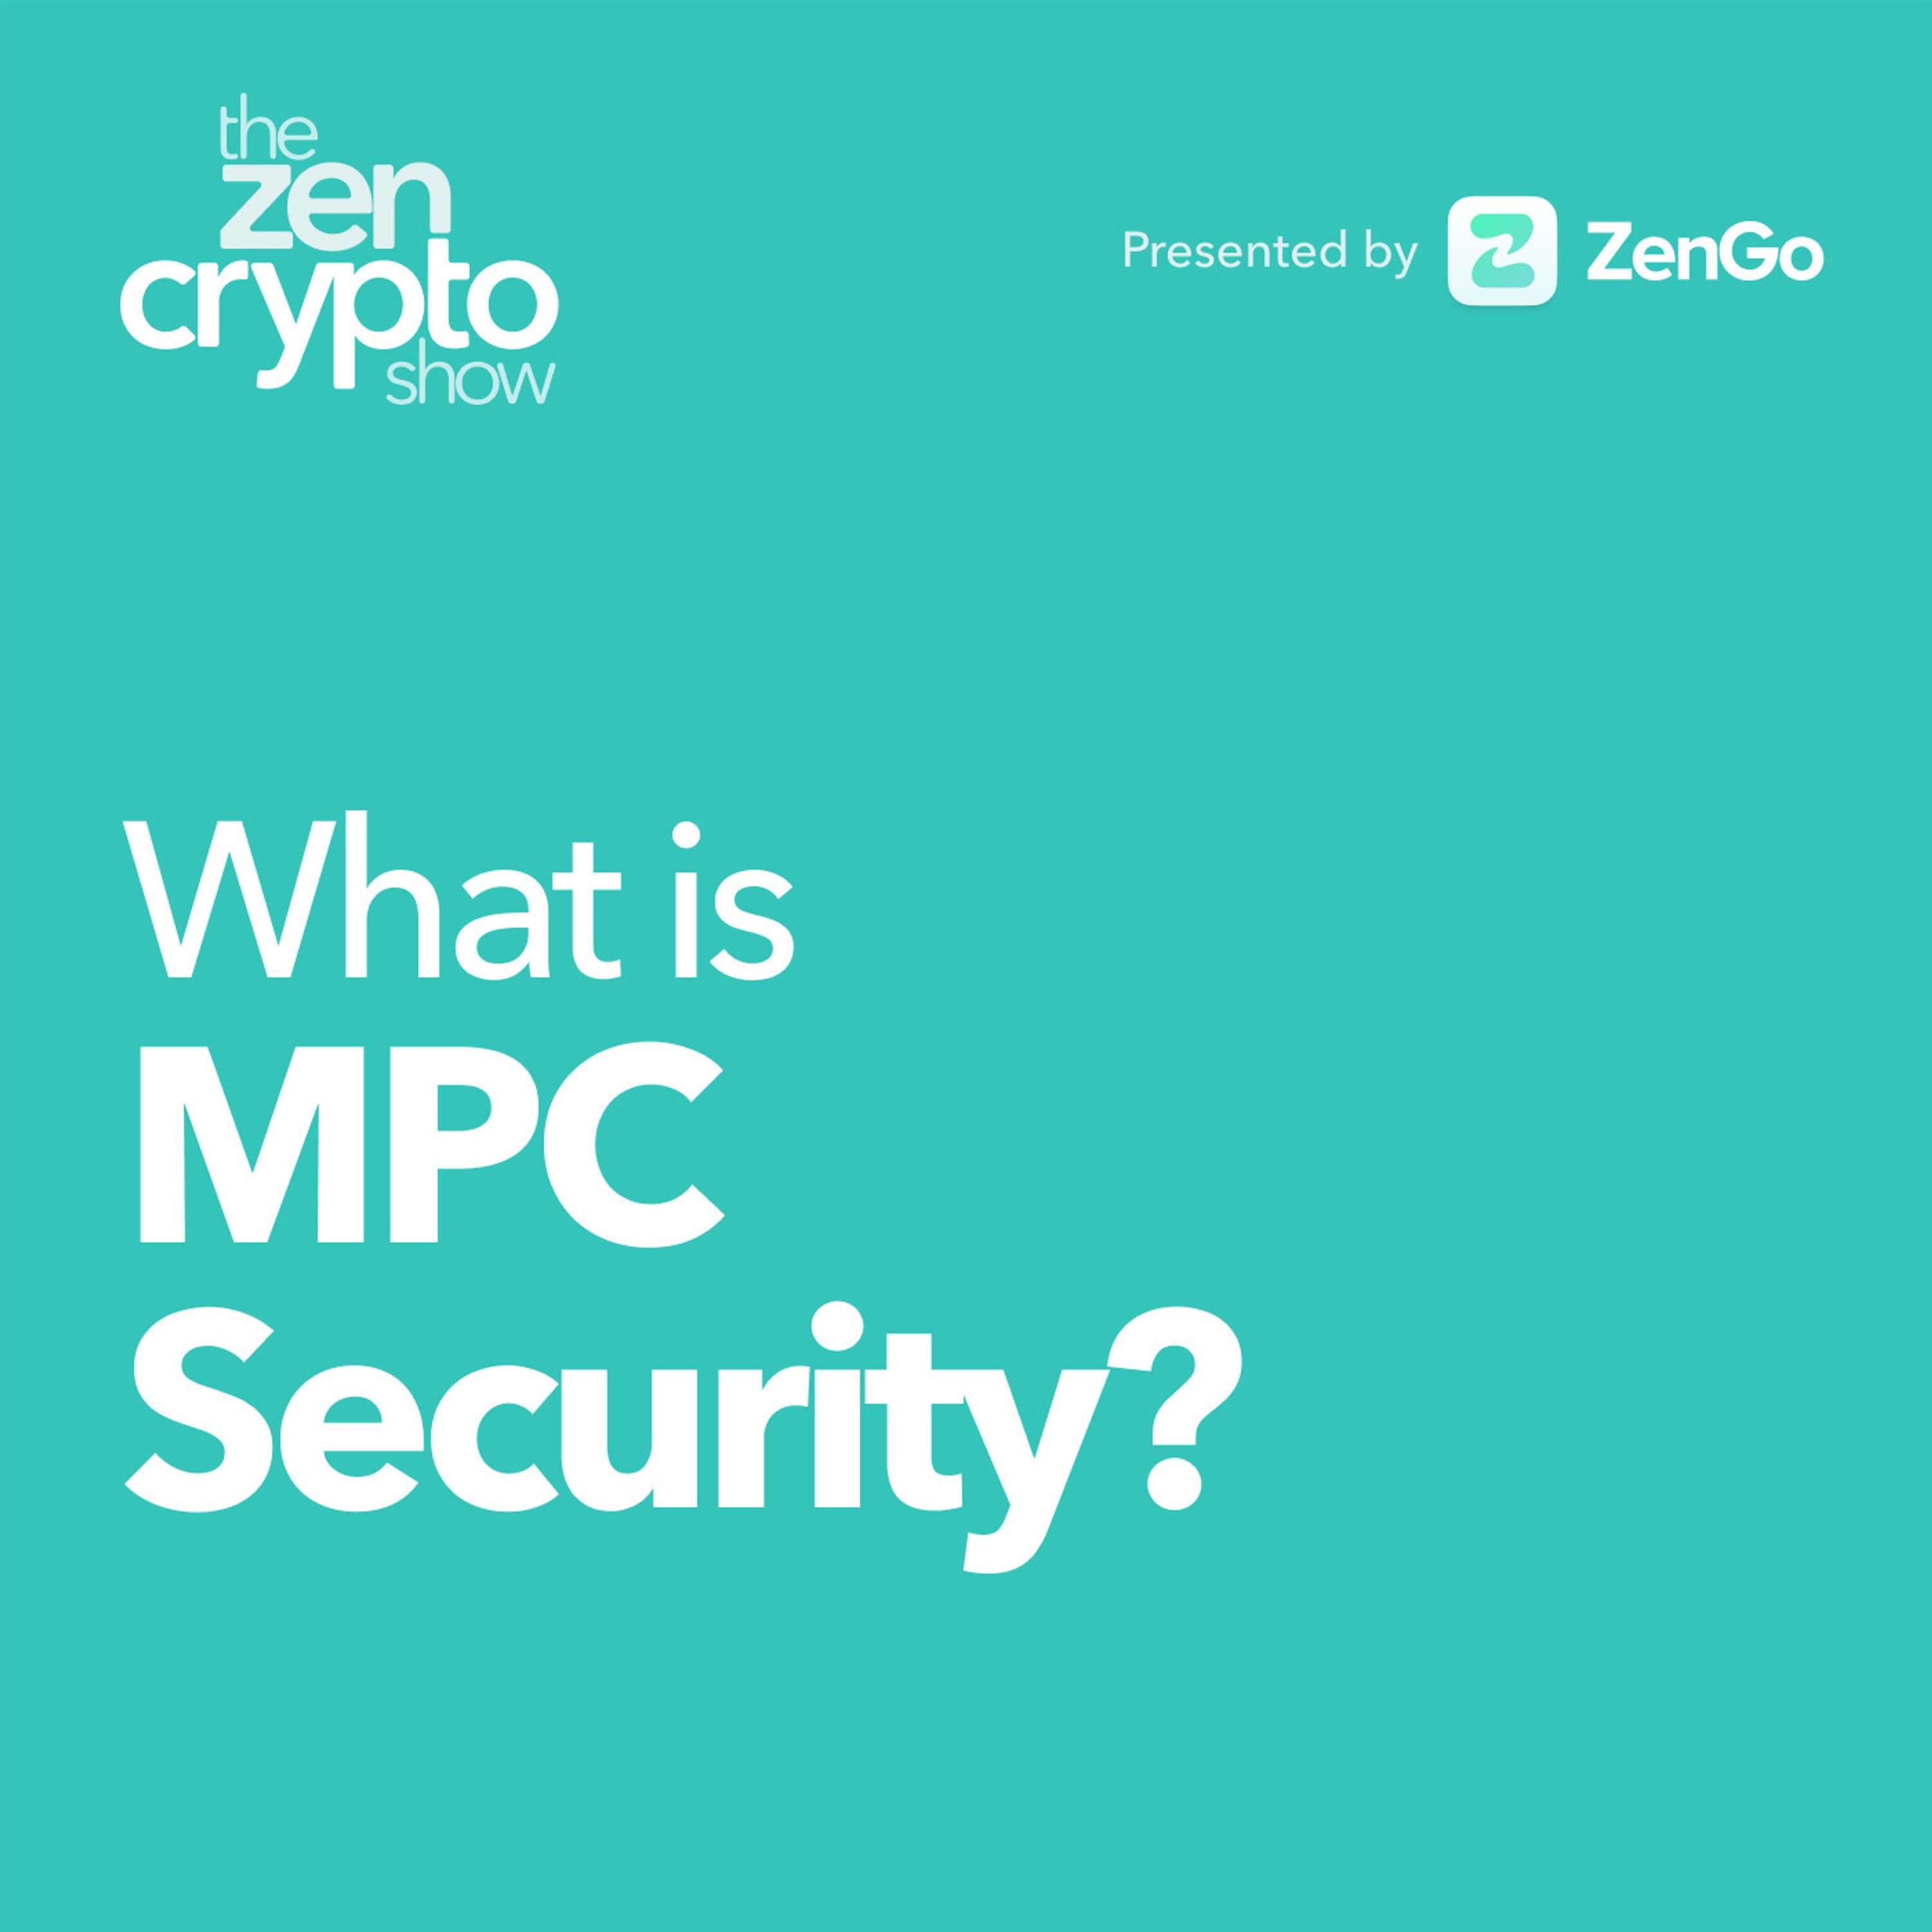 What is MPC security?